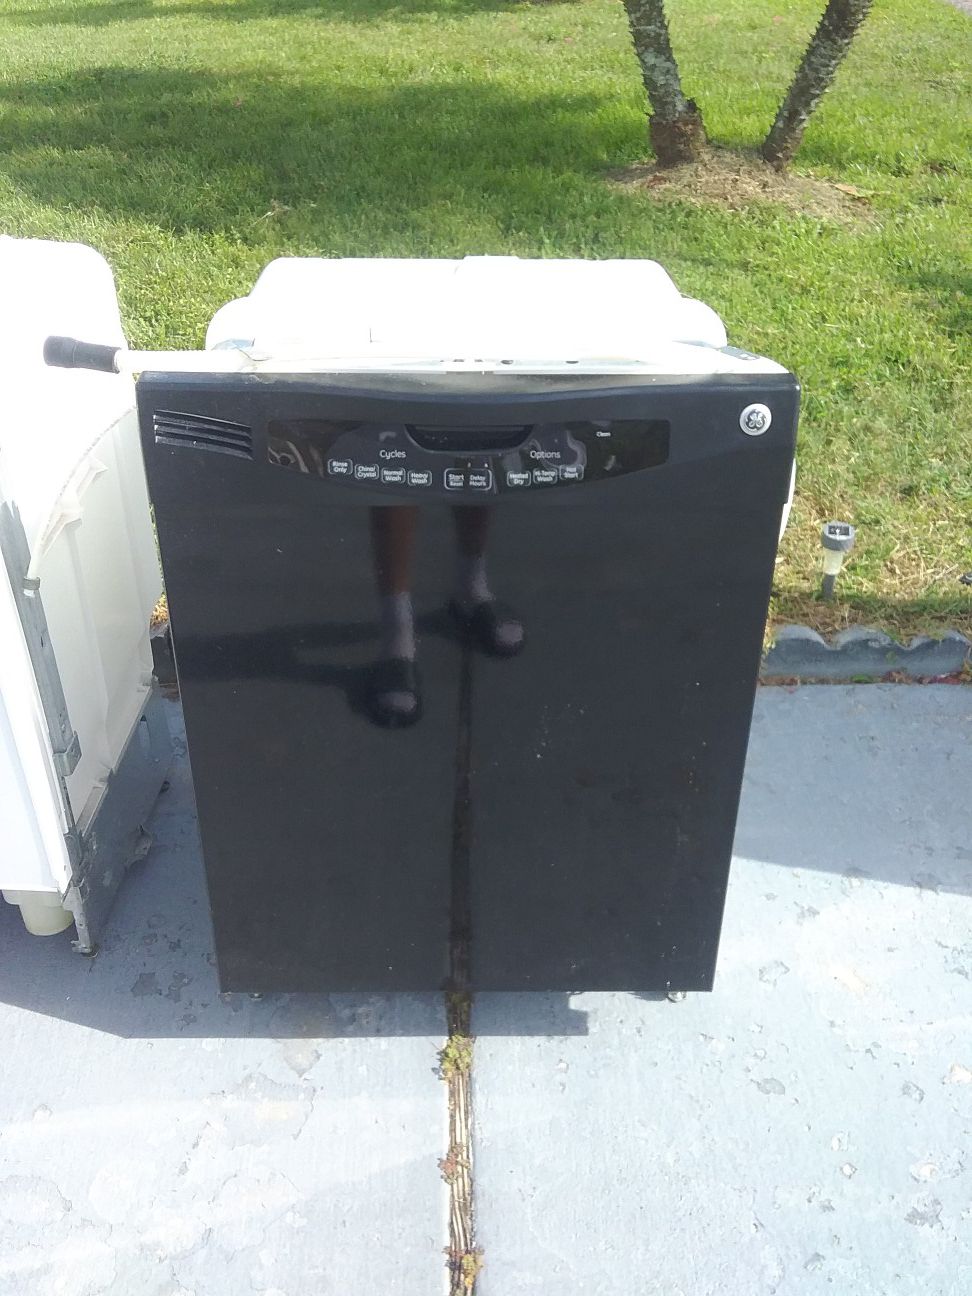 Black ge dishwasher with plastic tub in good working condition